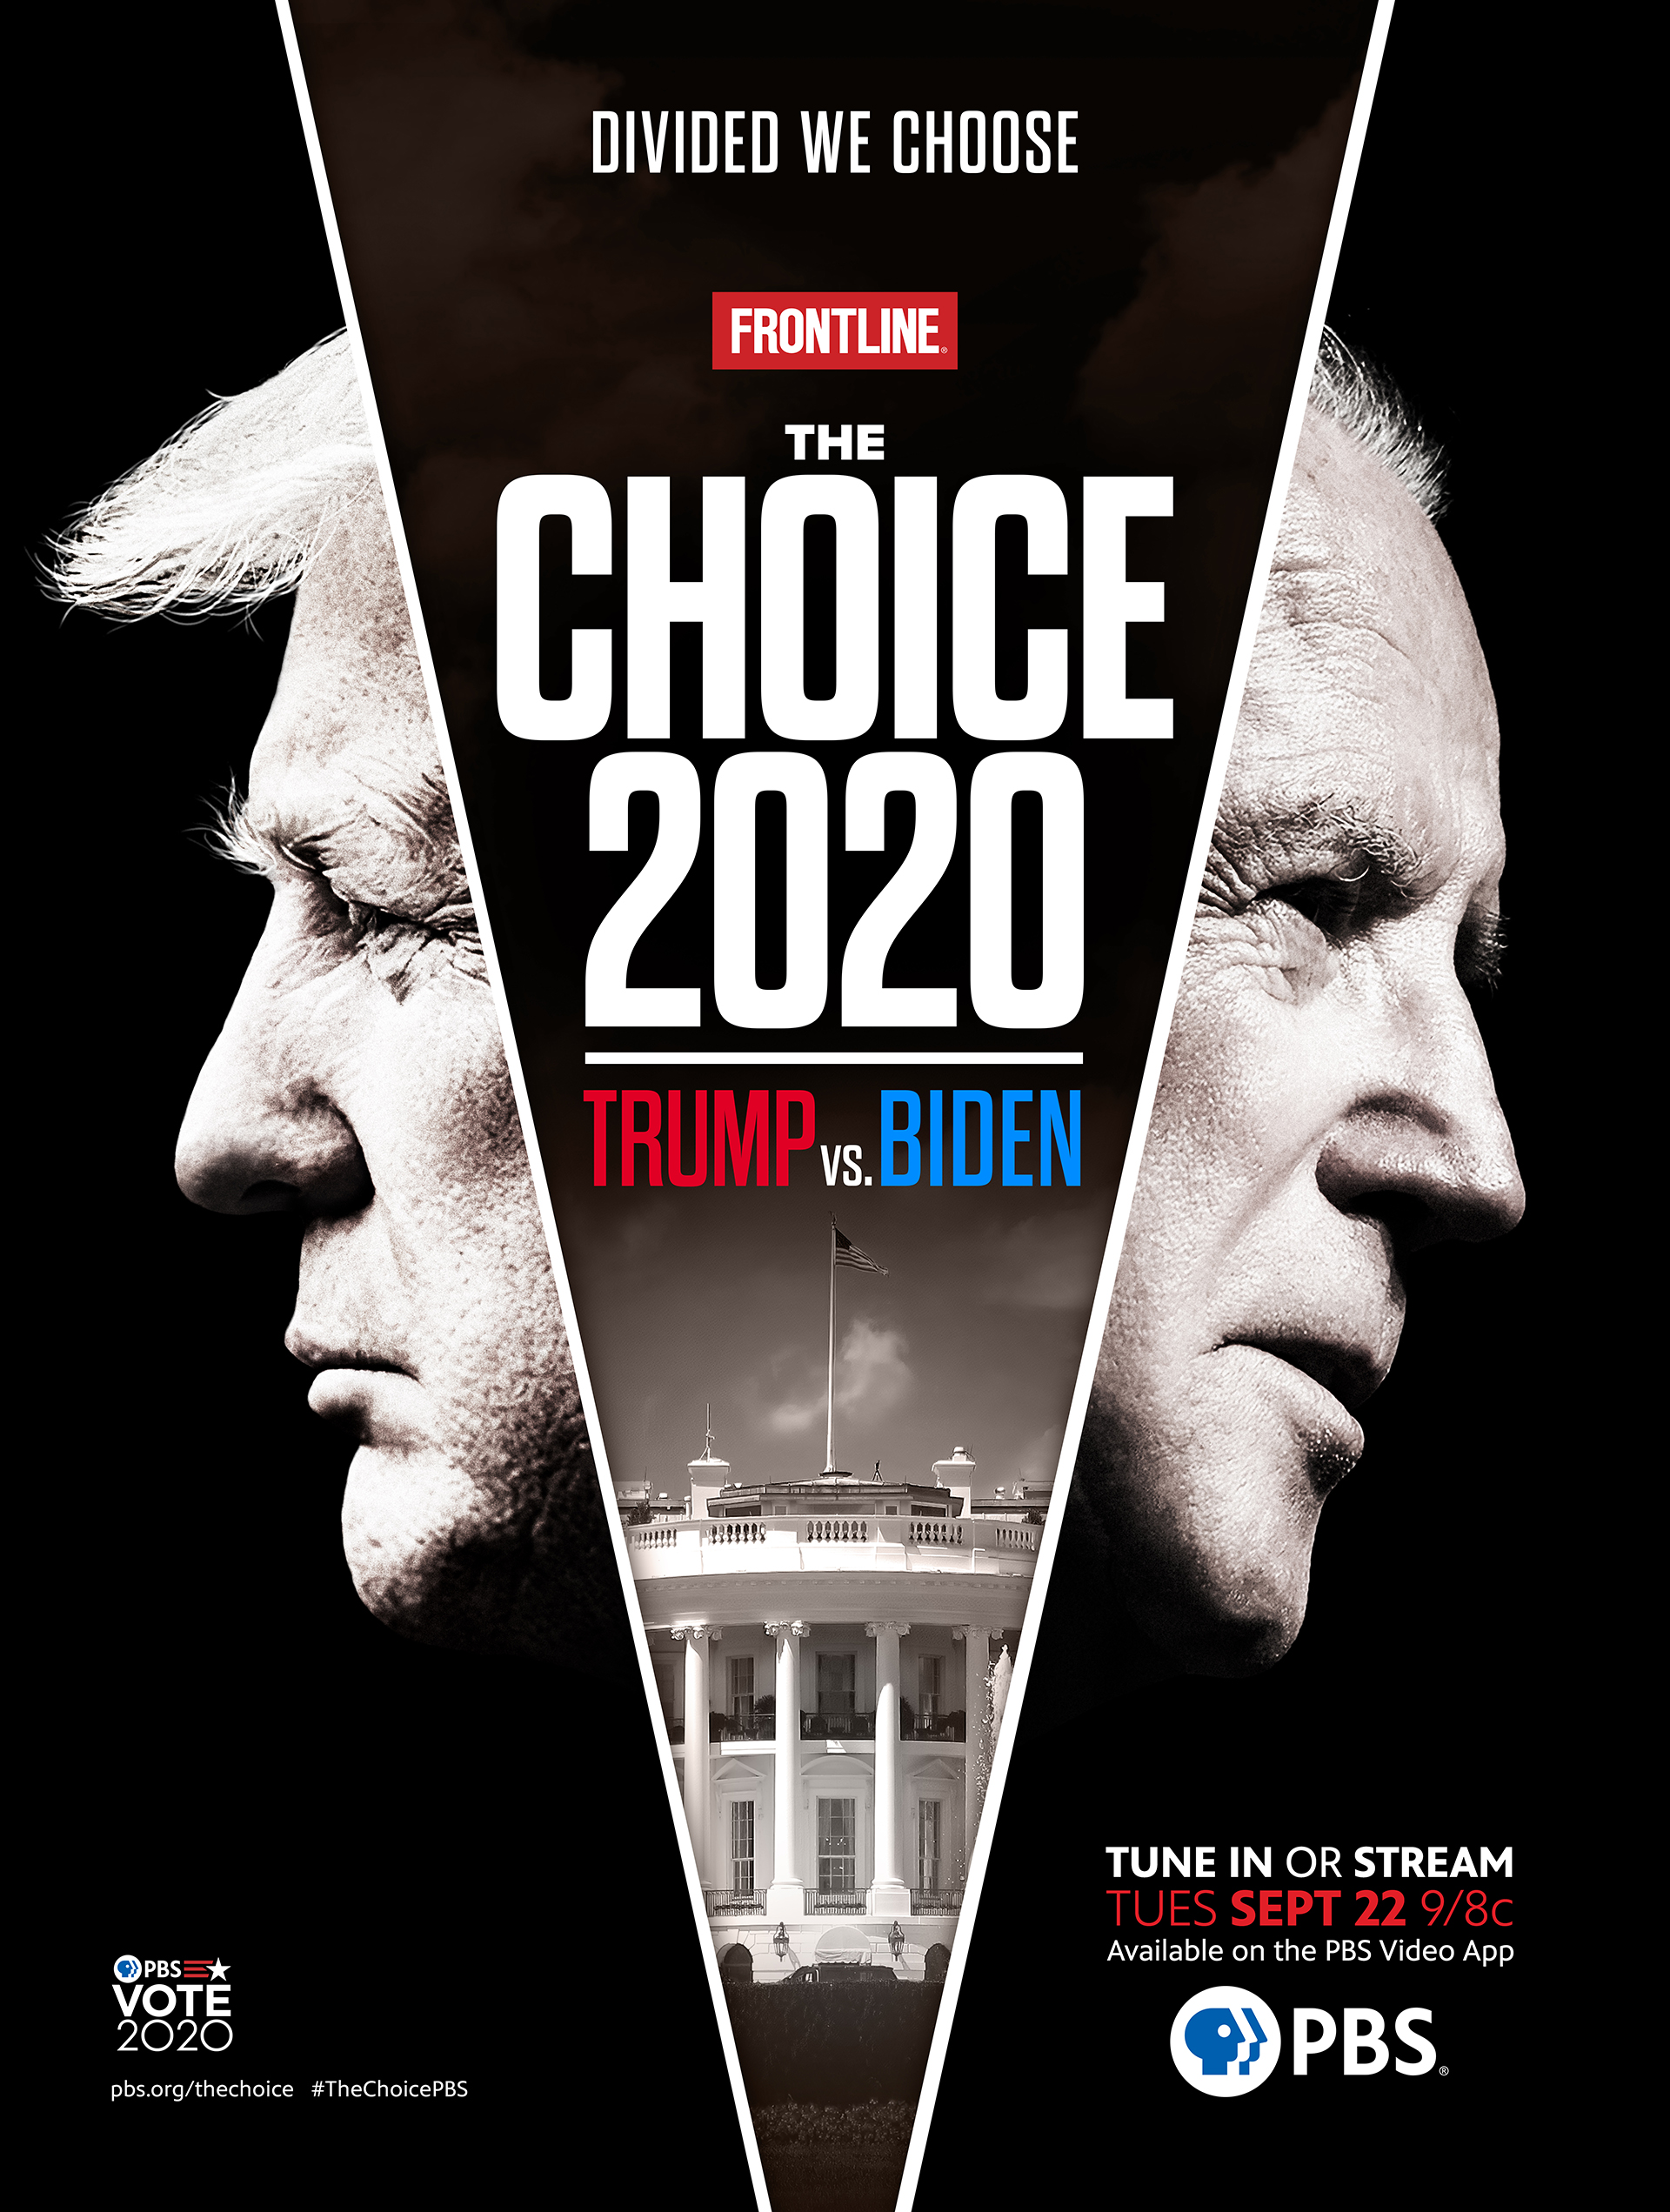 Episode 36 Michael Kirk Mike Wiser The Choice 2020 Trump Vs Biden Onwriting Writers Guild Of America East episode 36 michael kirk mike wiser